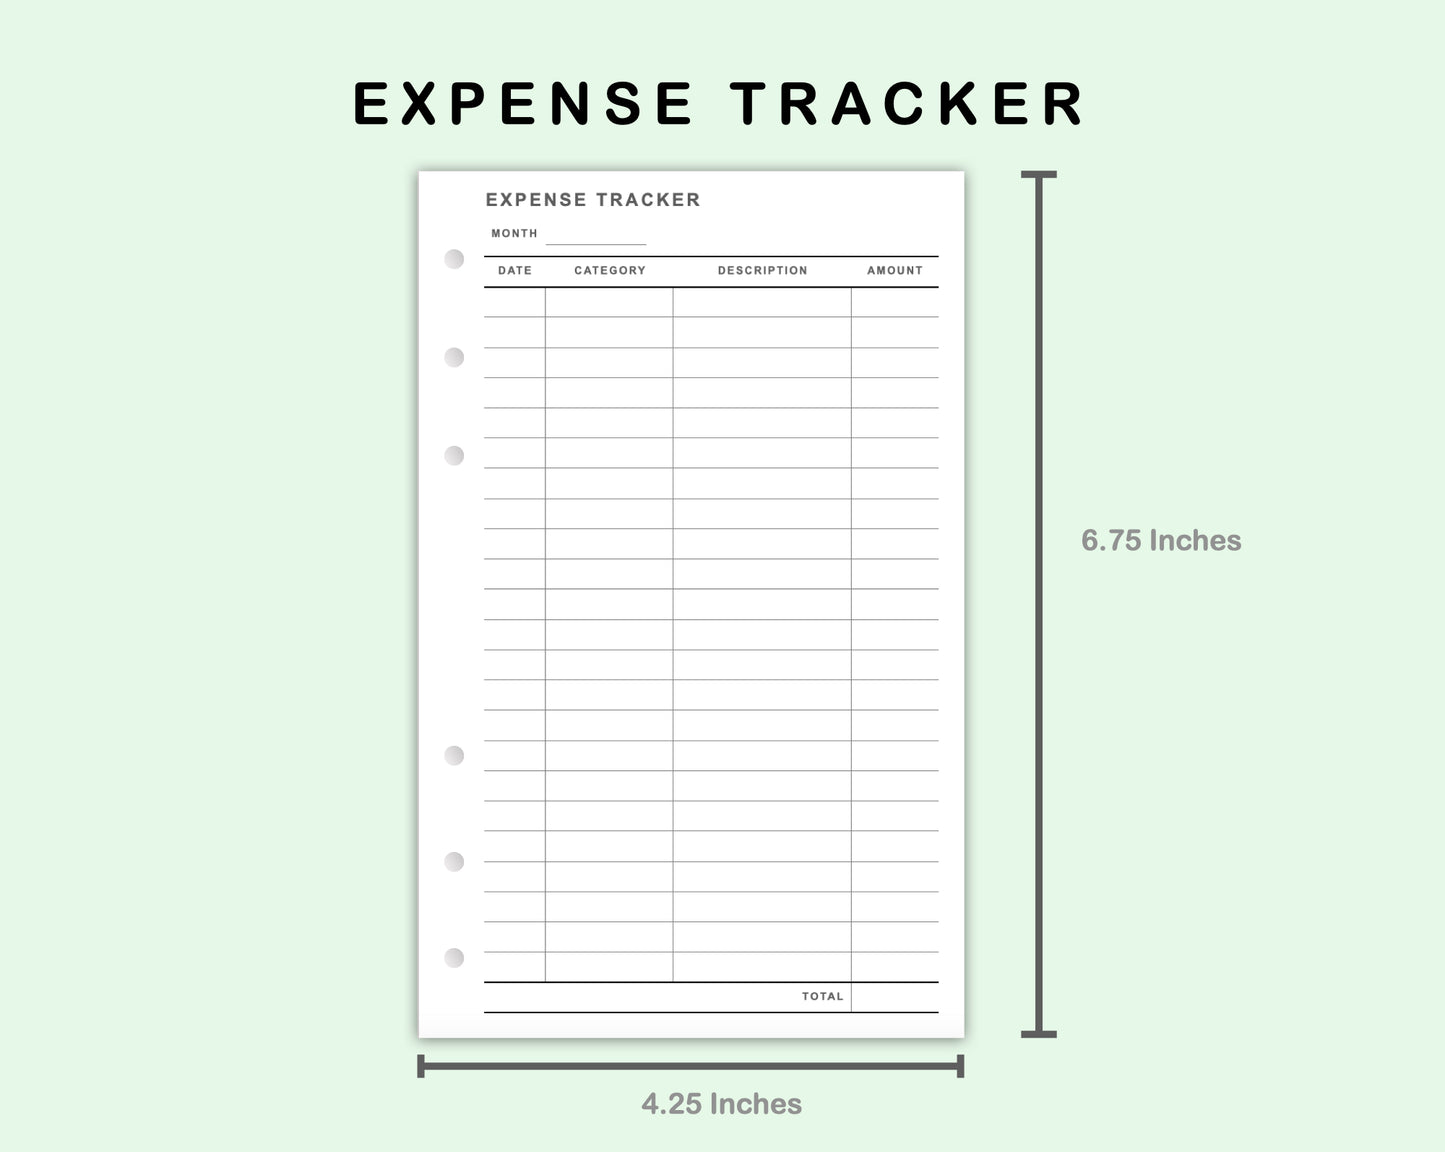 FC Compact Inserts - Income and Expense Tracker